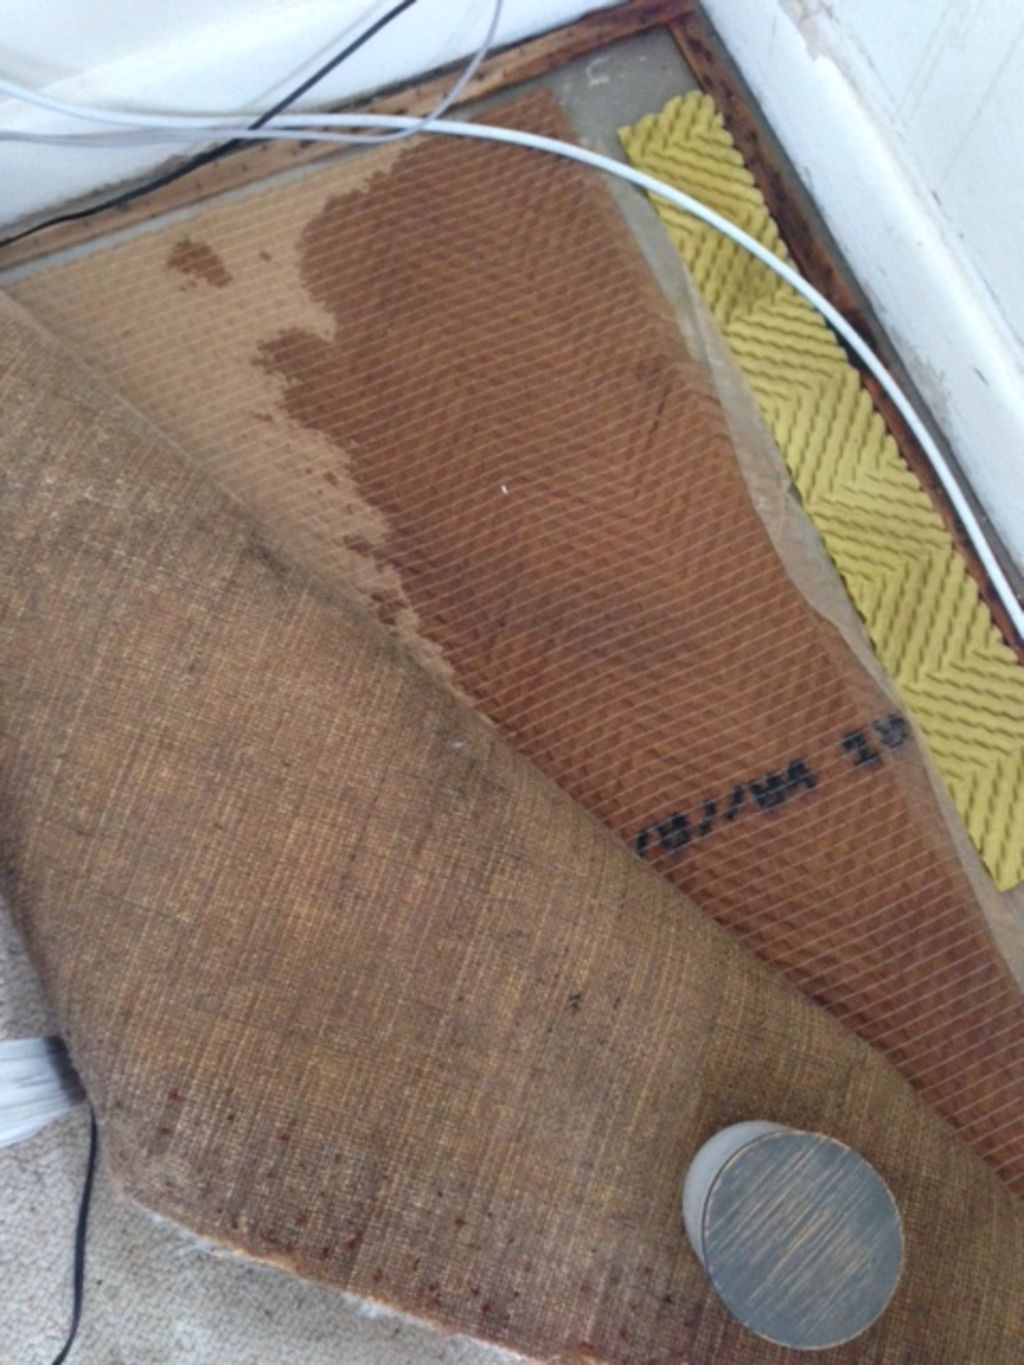 Water leaks and damage on the floor and through the carpet. Photo: Supplied